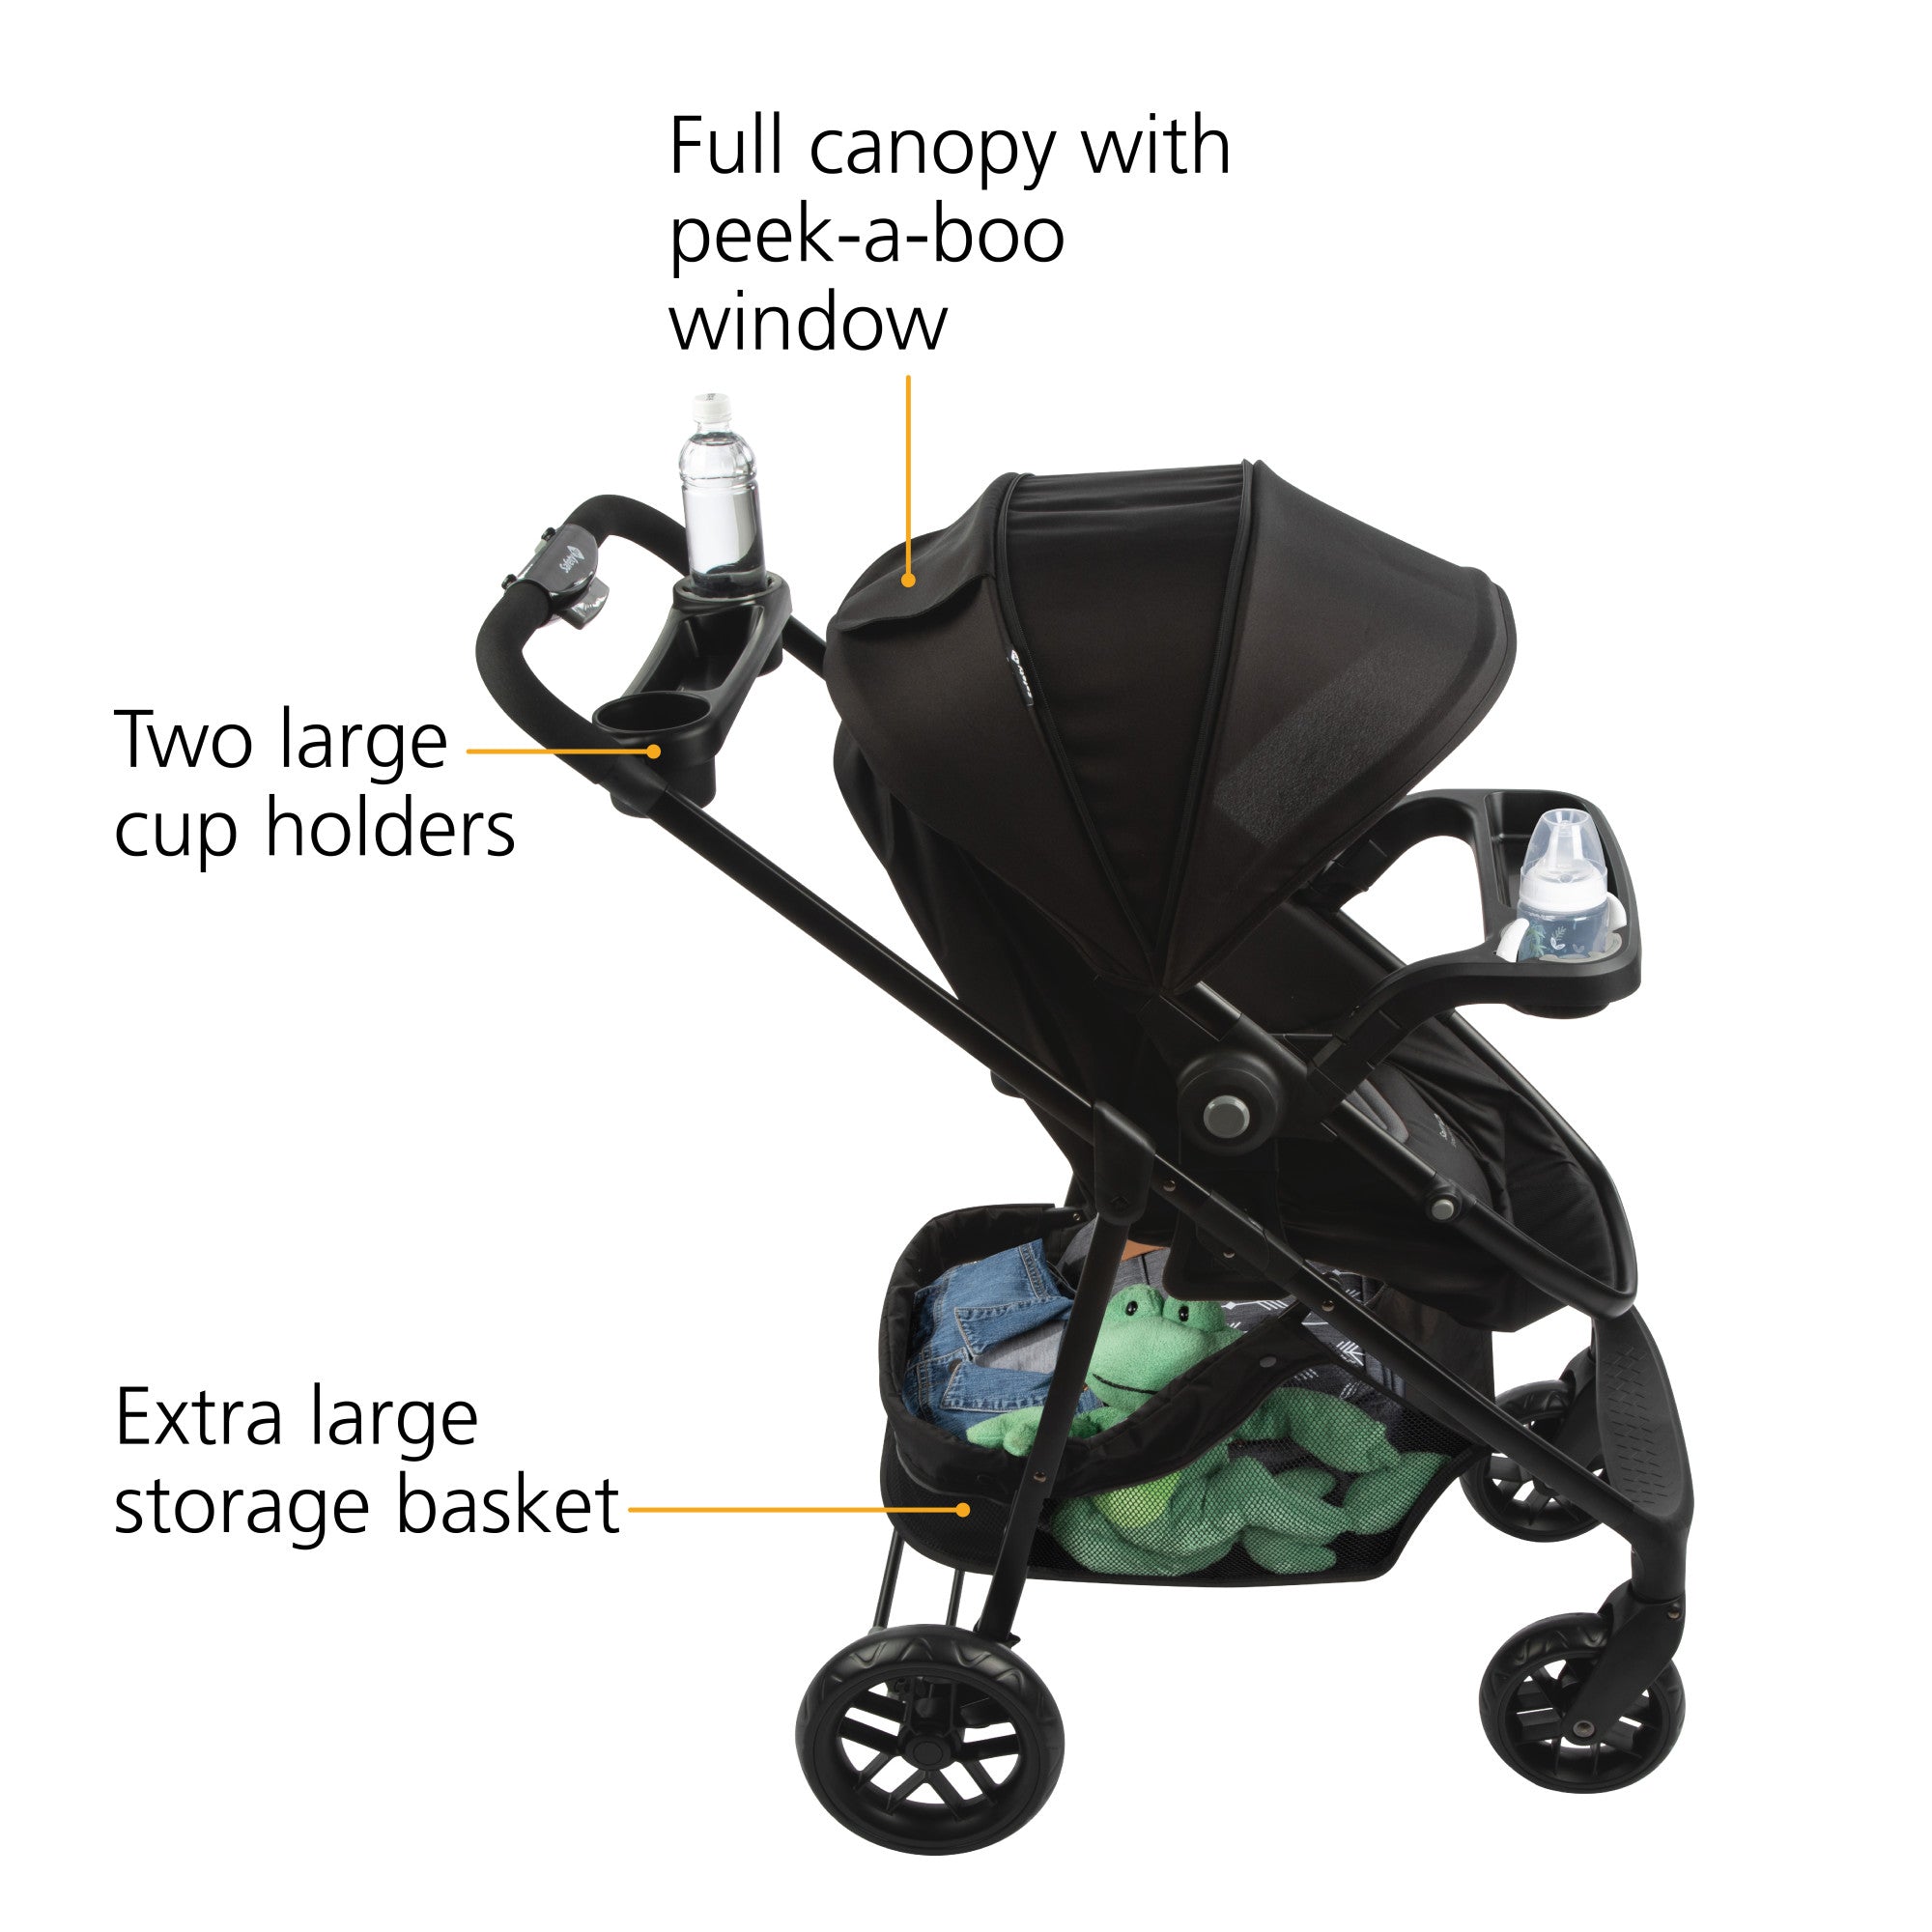 Grow and Go™ Flex 8-in-1 Travel System - peek-a-boo window, two large cup holders, and extra large storage basket